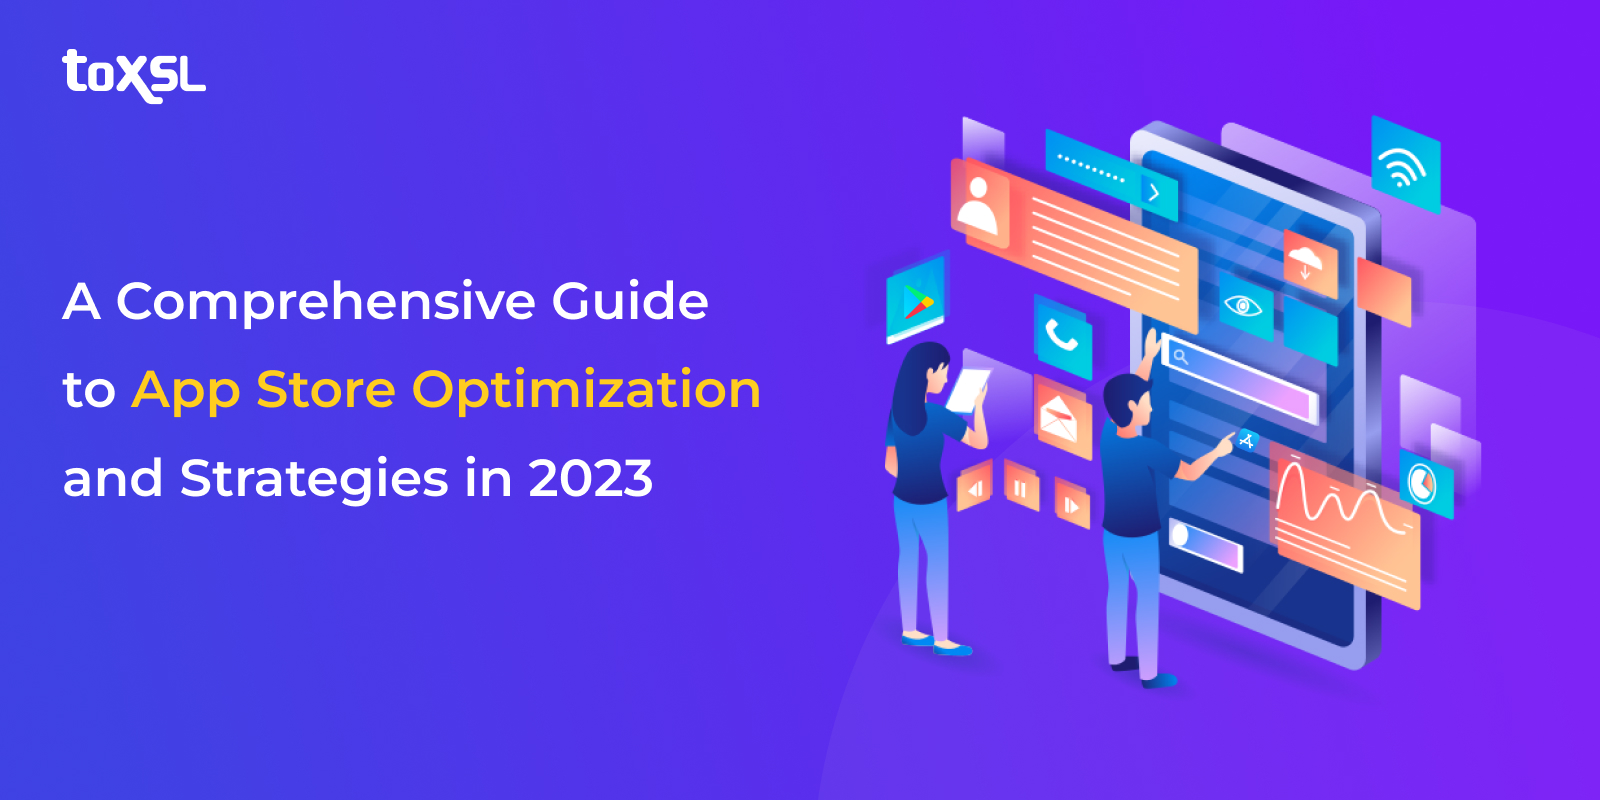 A Comprehensive Guide To App Store Optimization And Strategies In 2023